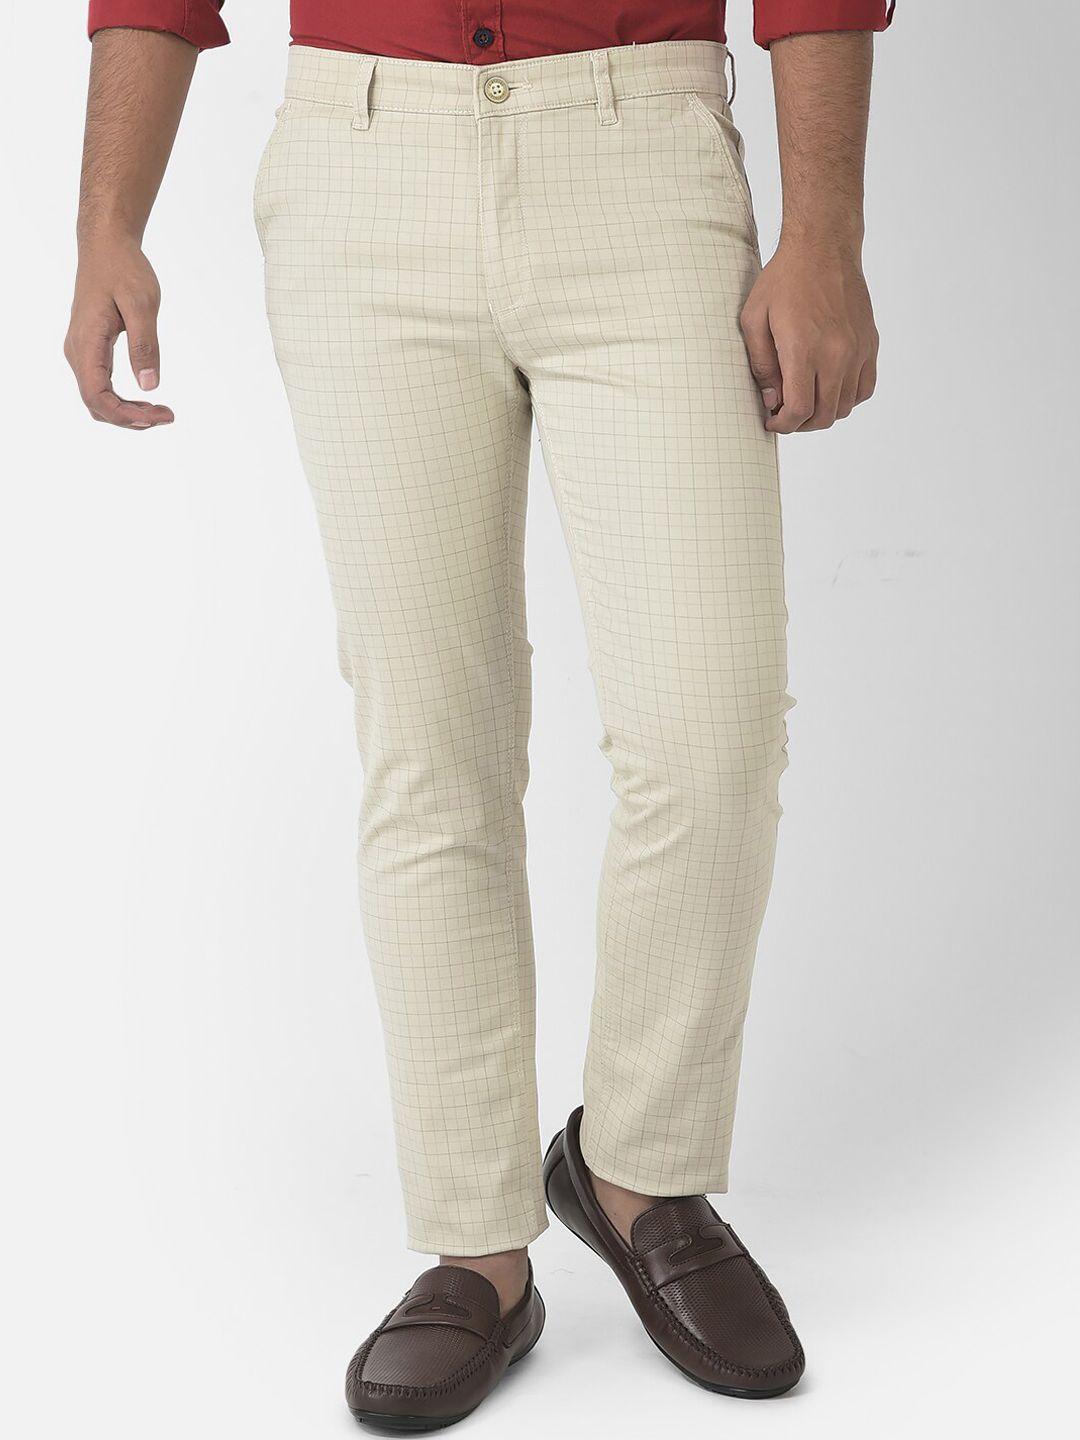 crimsoune-club-boys-checked-relaxed-cotton-chinos-trousers